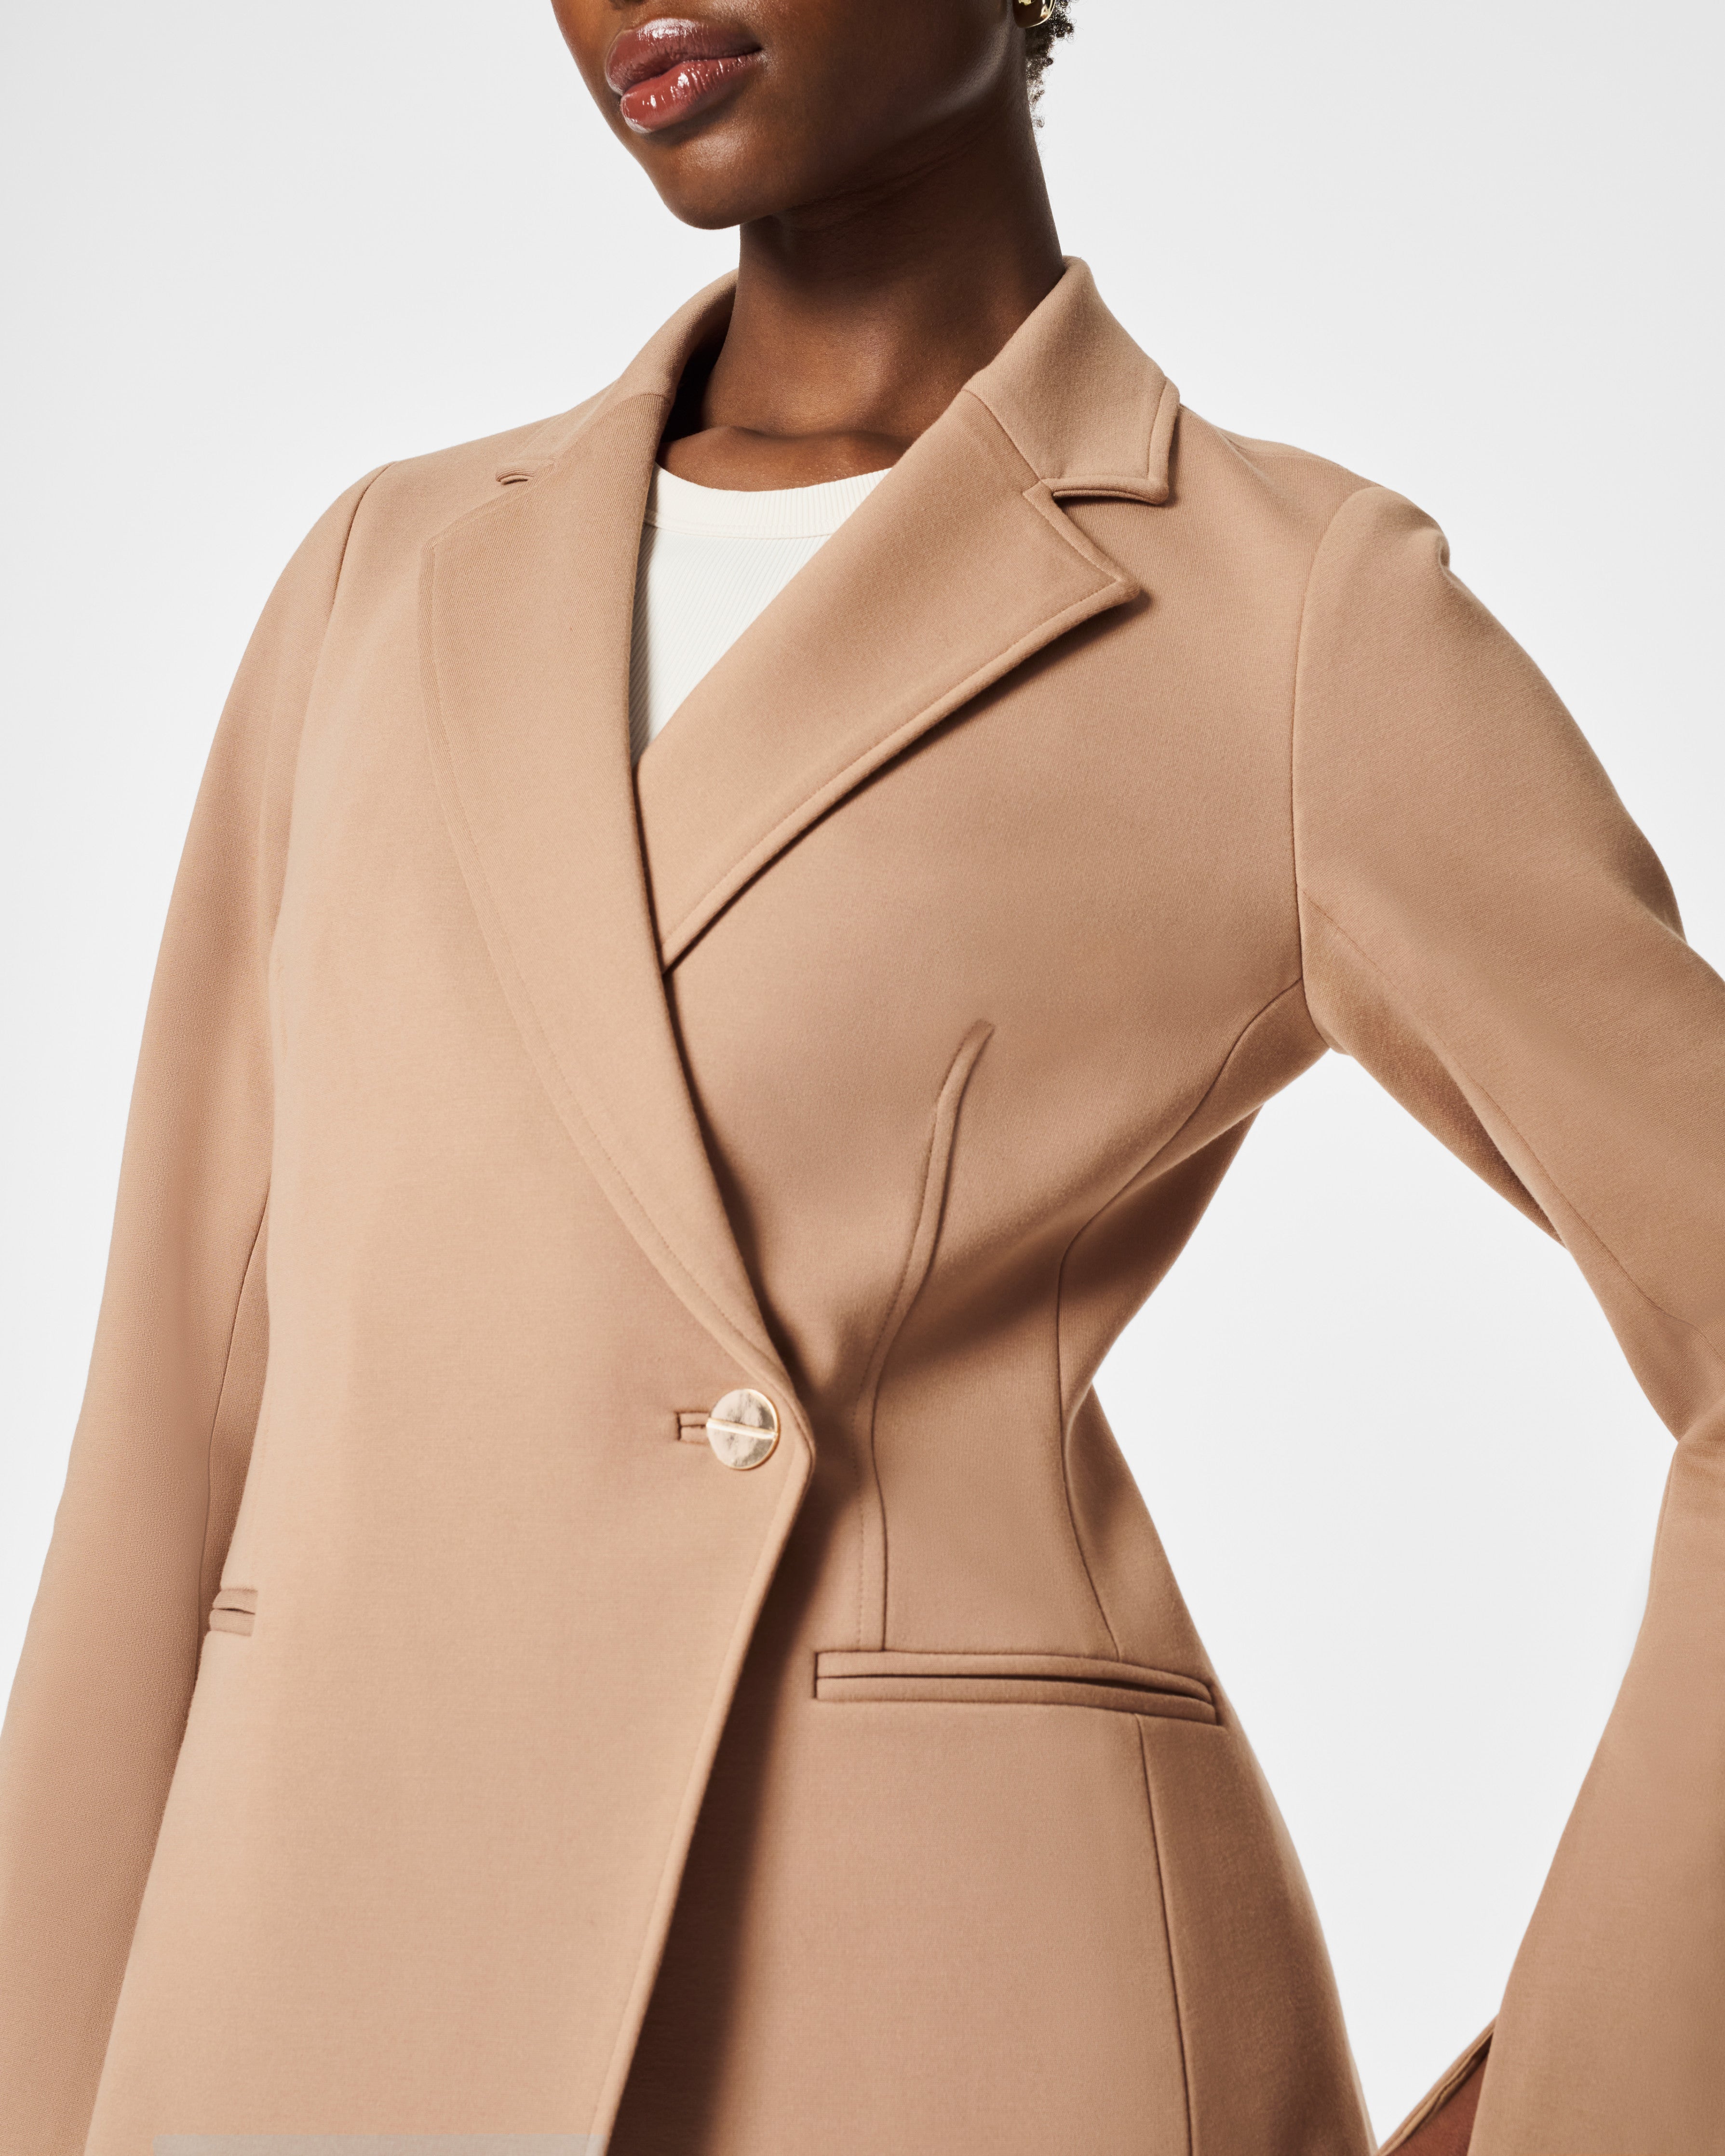 SPANX on X: Welcoming in the new year in workwear styles. Shop our NEW  Perfect Asymmetric Tailored Blazer in Toffee:   #Workwear #SPANX #NewYear  / X